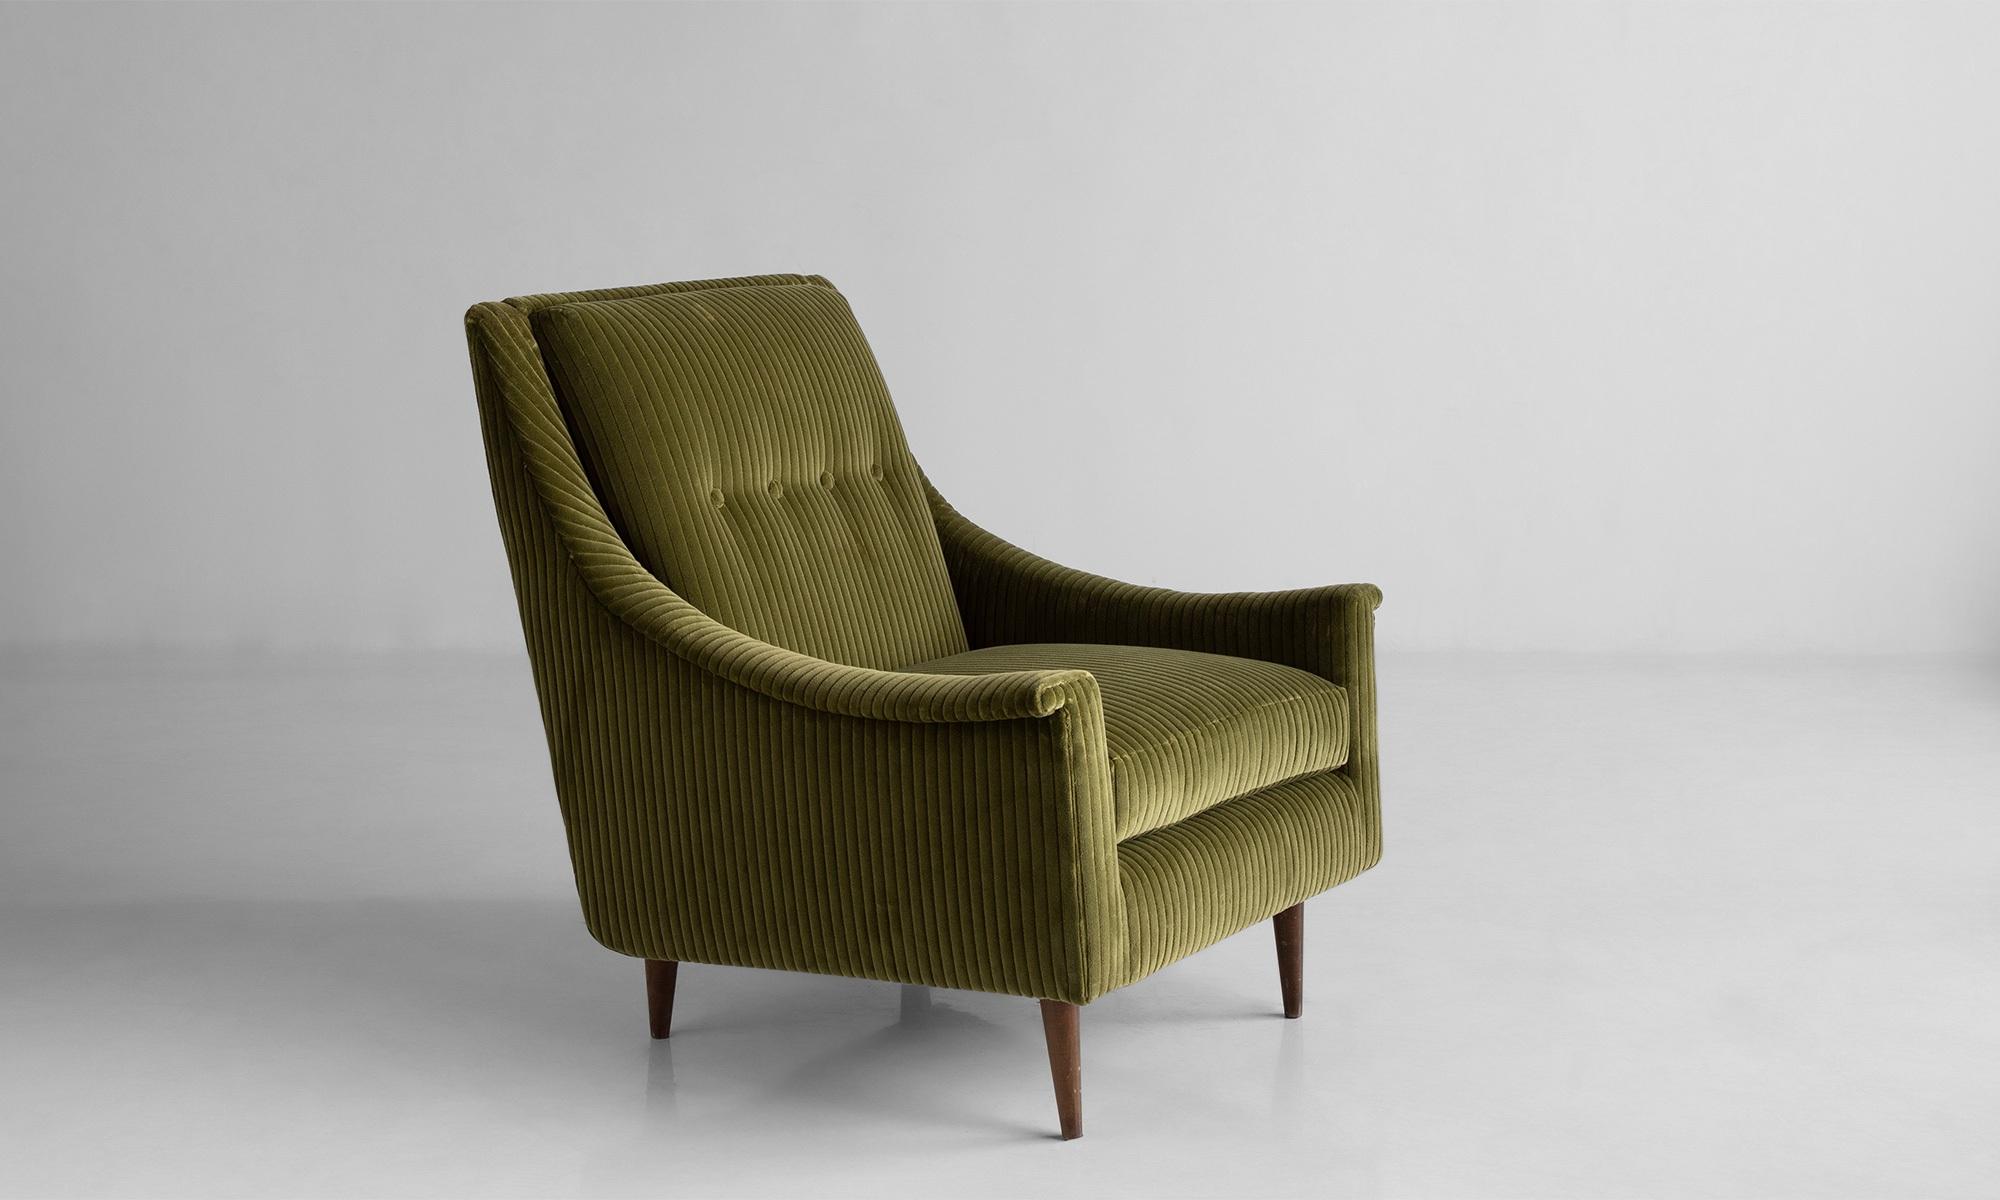 Modern armchair in wide wale velvet corduroy by Maharam

America Circa 1970

Newly upholstered in green corduroy with legs in original finish.

Measures: 30”W x 30.25”D x 34”H x 18”seat.